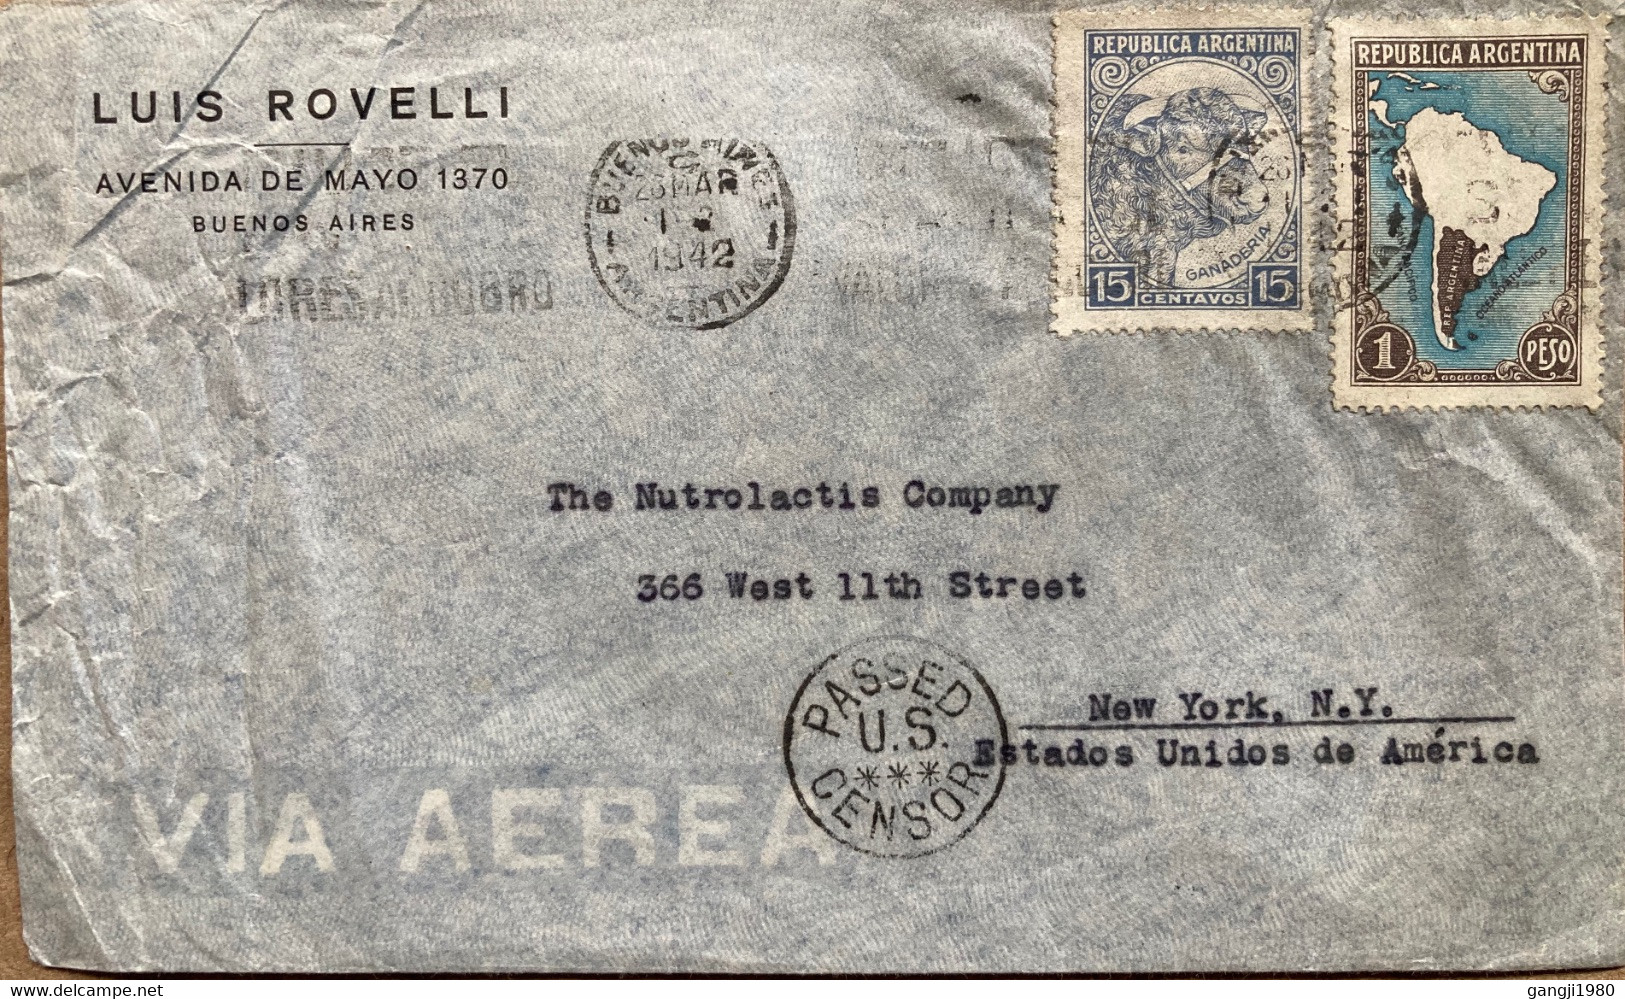 ARGENTINA-1942, WORLD WAR-2, COVER USED TO USA,PASSED US CENSOR CANCEL, PRIVATE COVER, LUIS ROVELLI, MAP, BUFFALO STAMP. - Covers & Documents